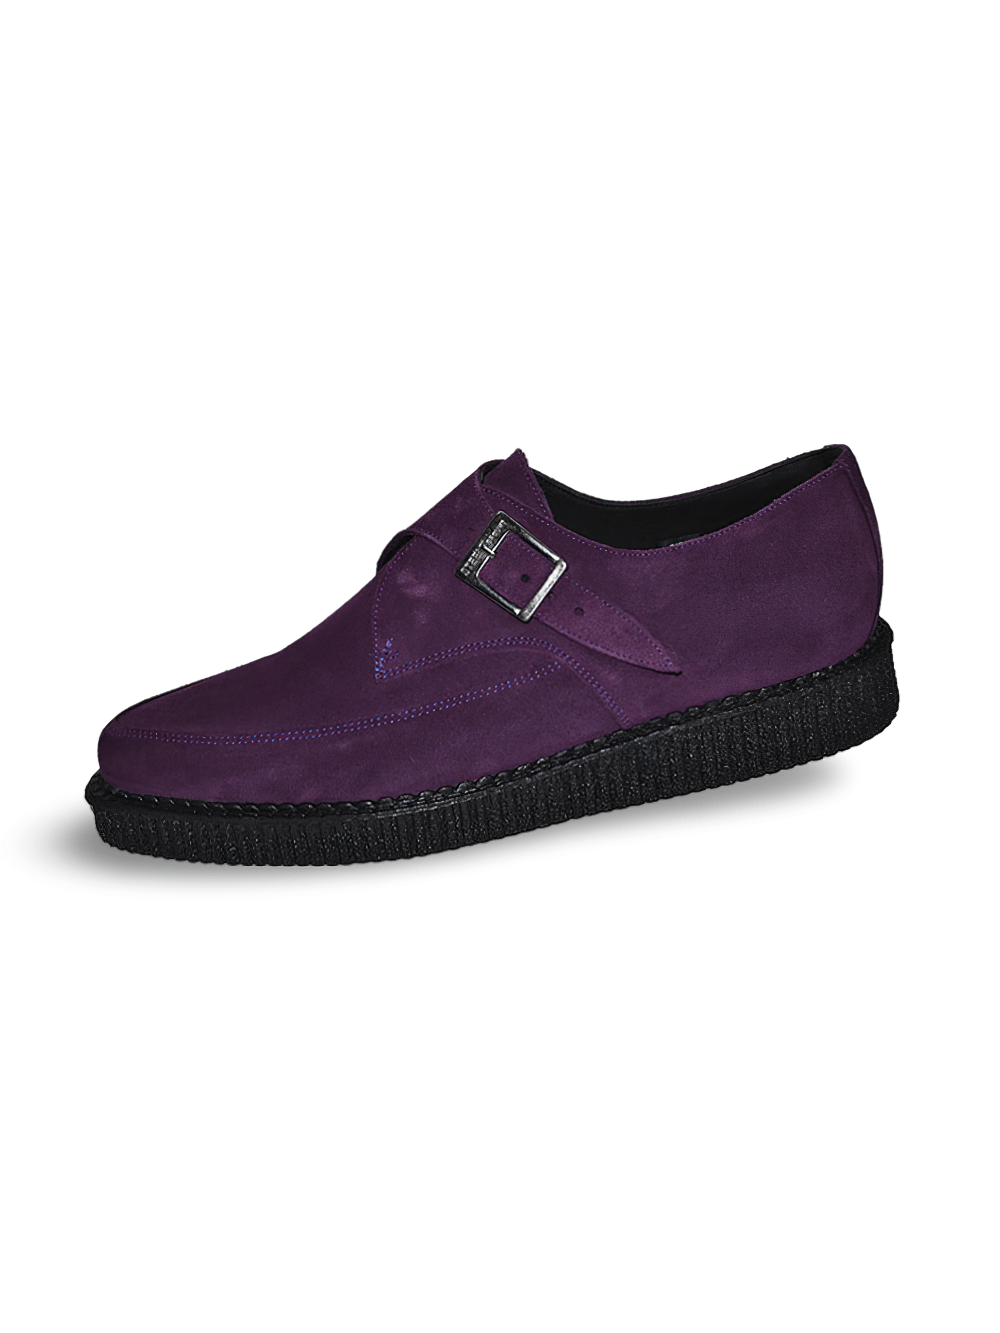 Unisex Purple Suede Pointed Creepers with Buckle